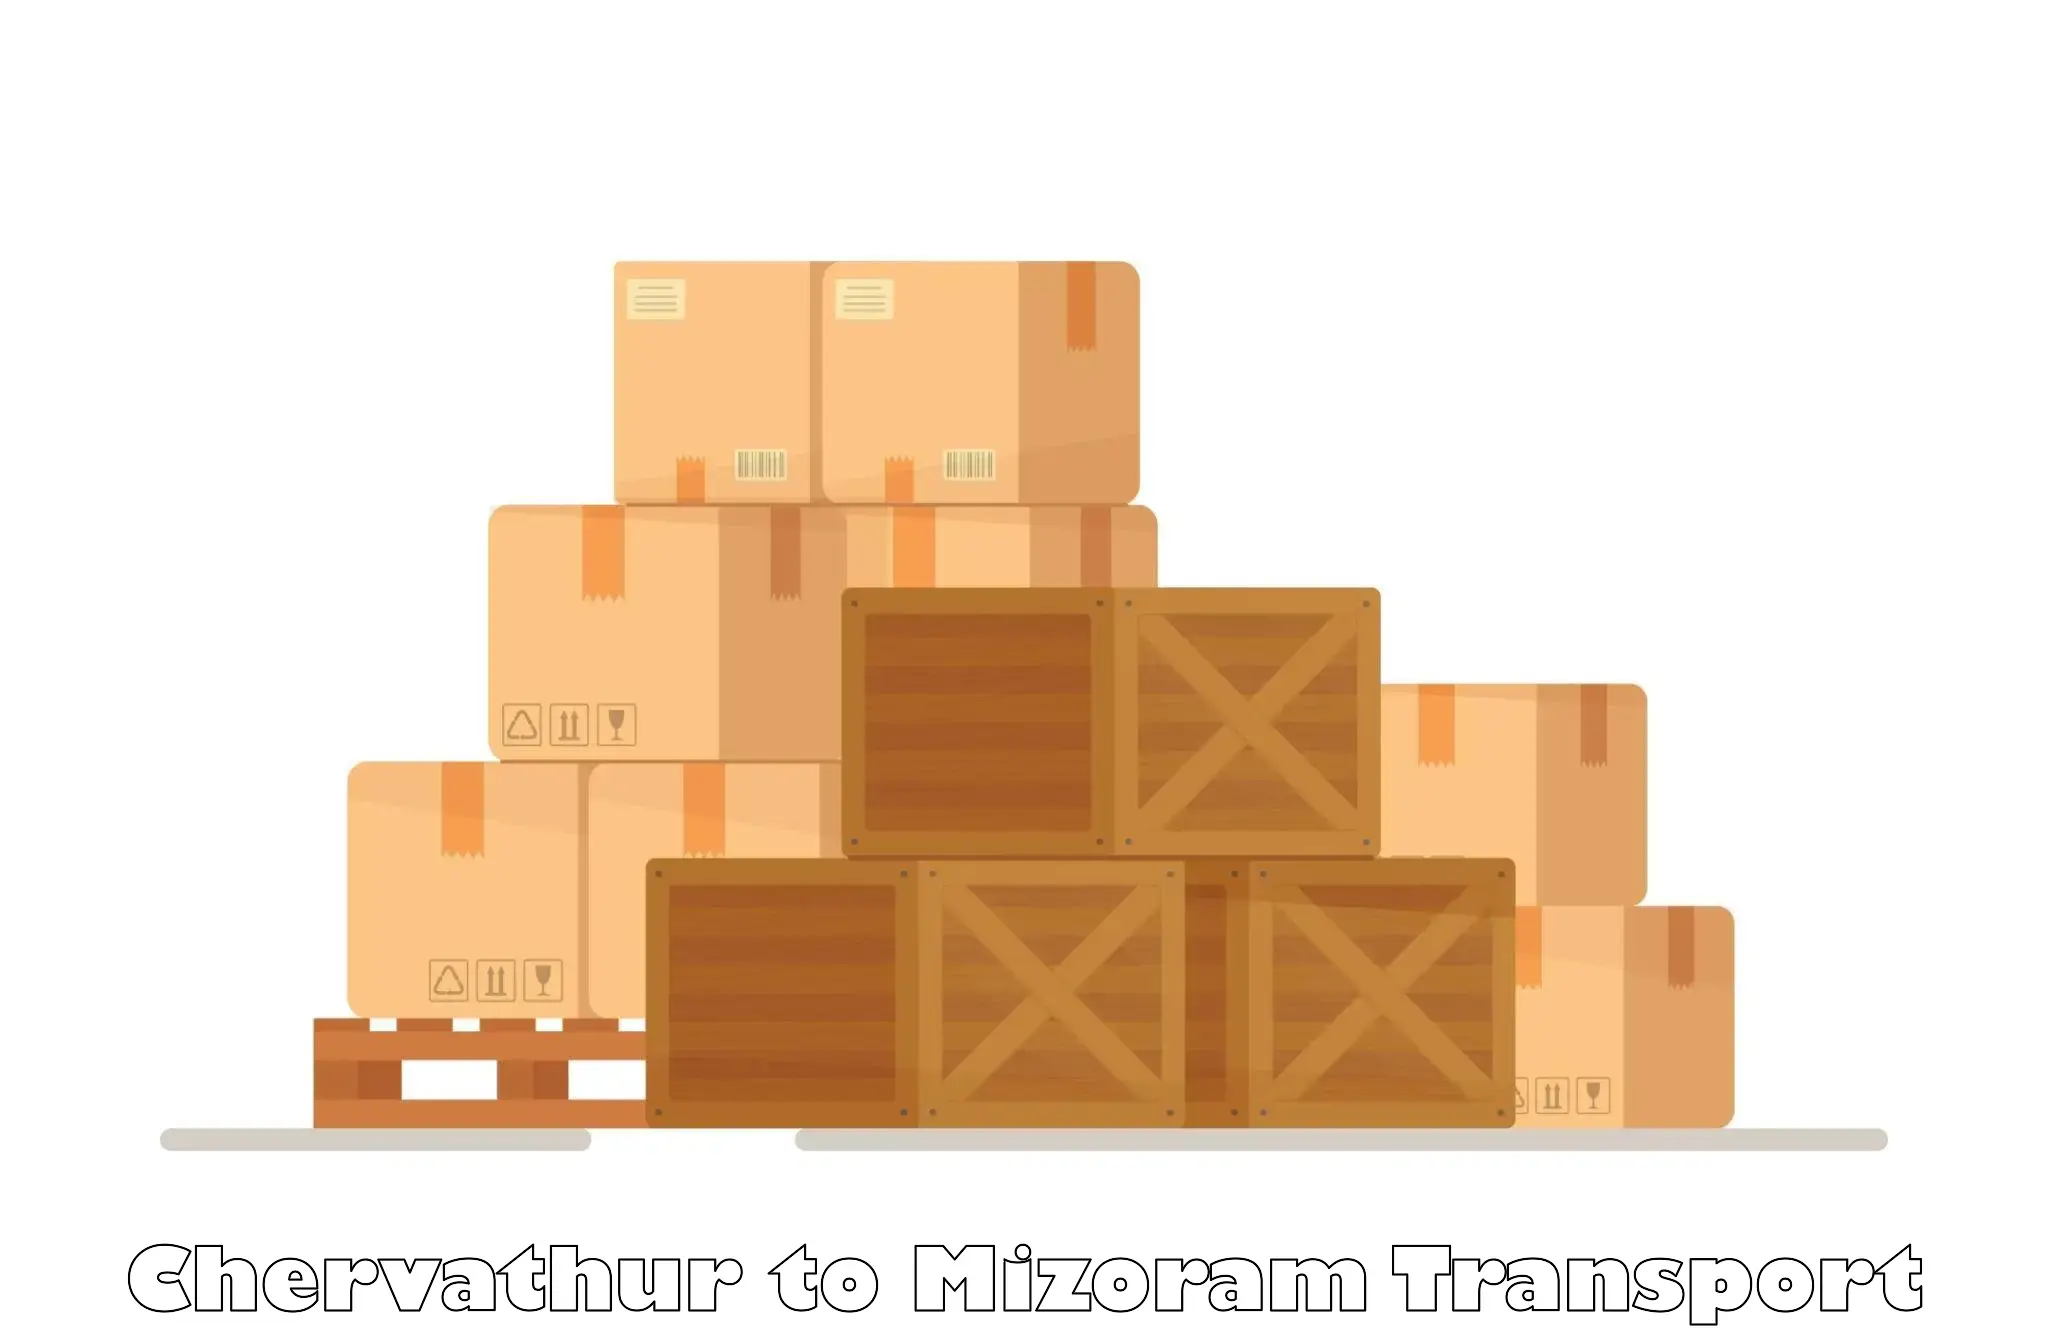 Container transport service Chervathur to Thenzawl